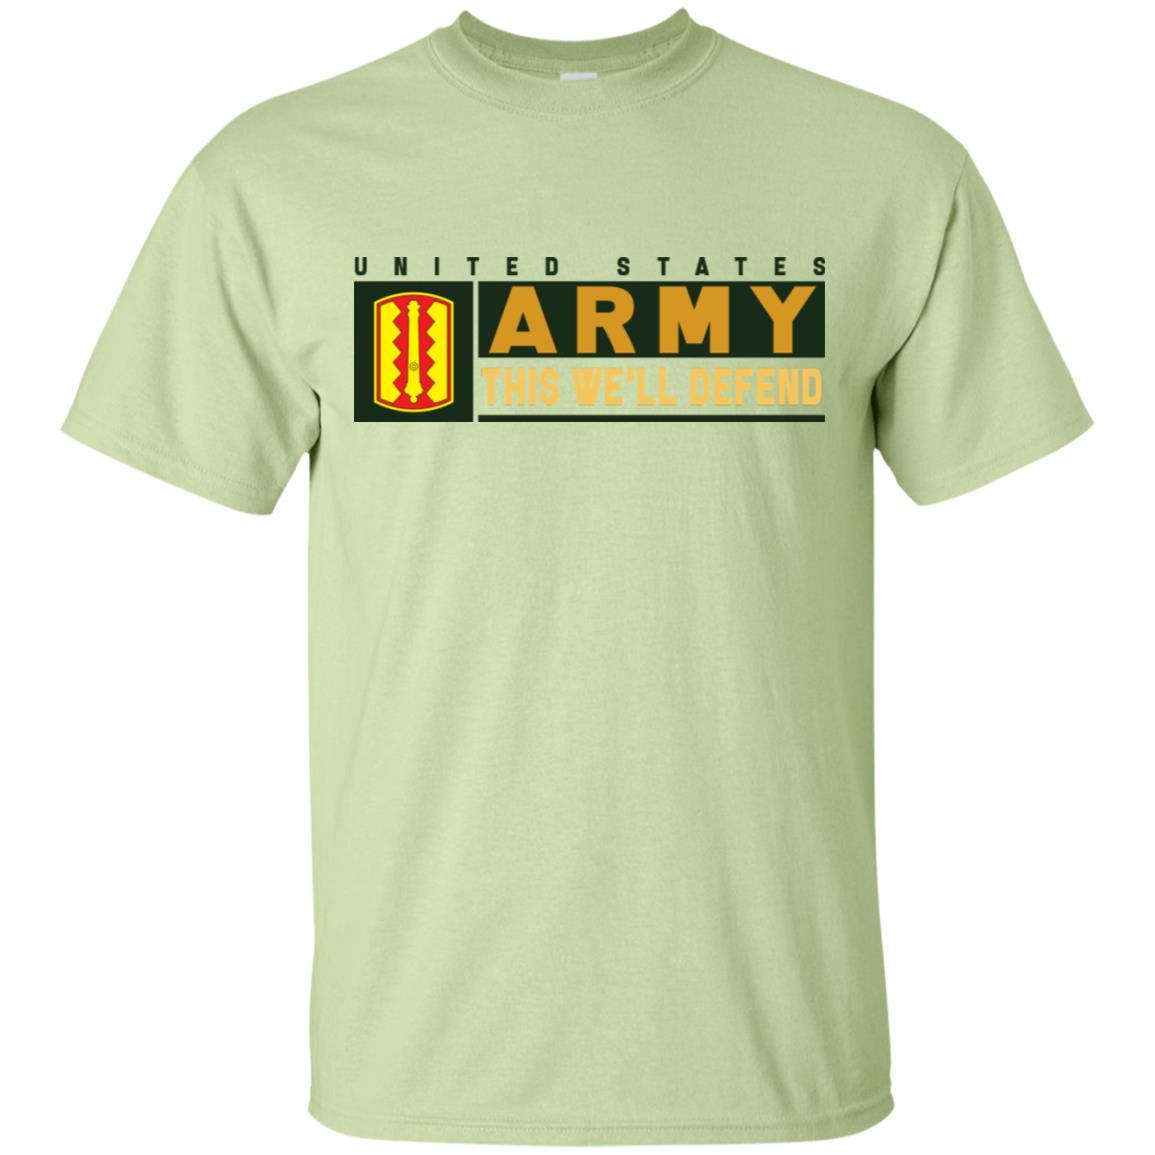 US Army 54 FIELD ARTILLERY BRIGADE- This We'll Defend T-Shirt On Front For Men-TShirt-Army-Veterans Nation